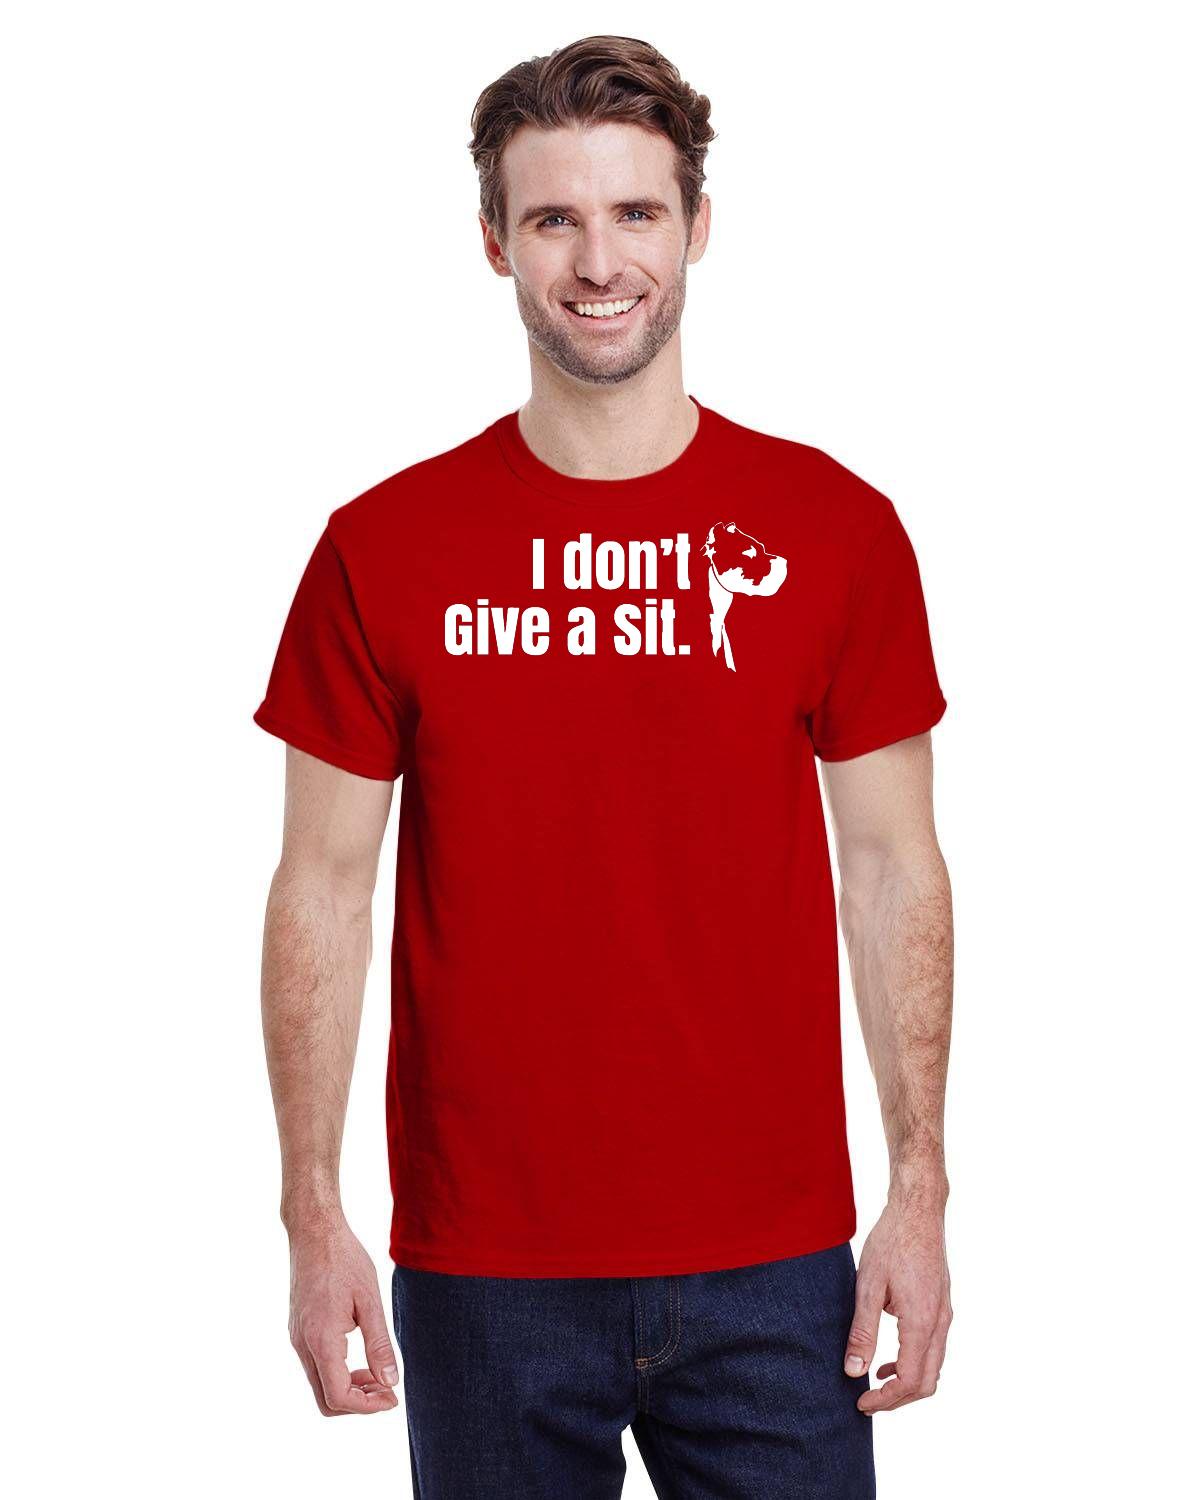 CDAC "I Don't Give A Sit" Dark Colour Adult t-shirt